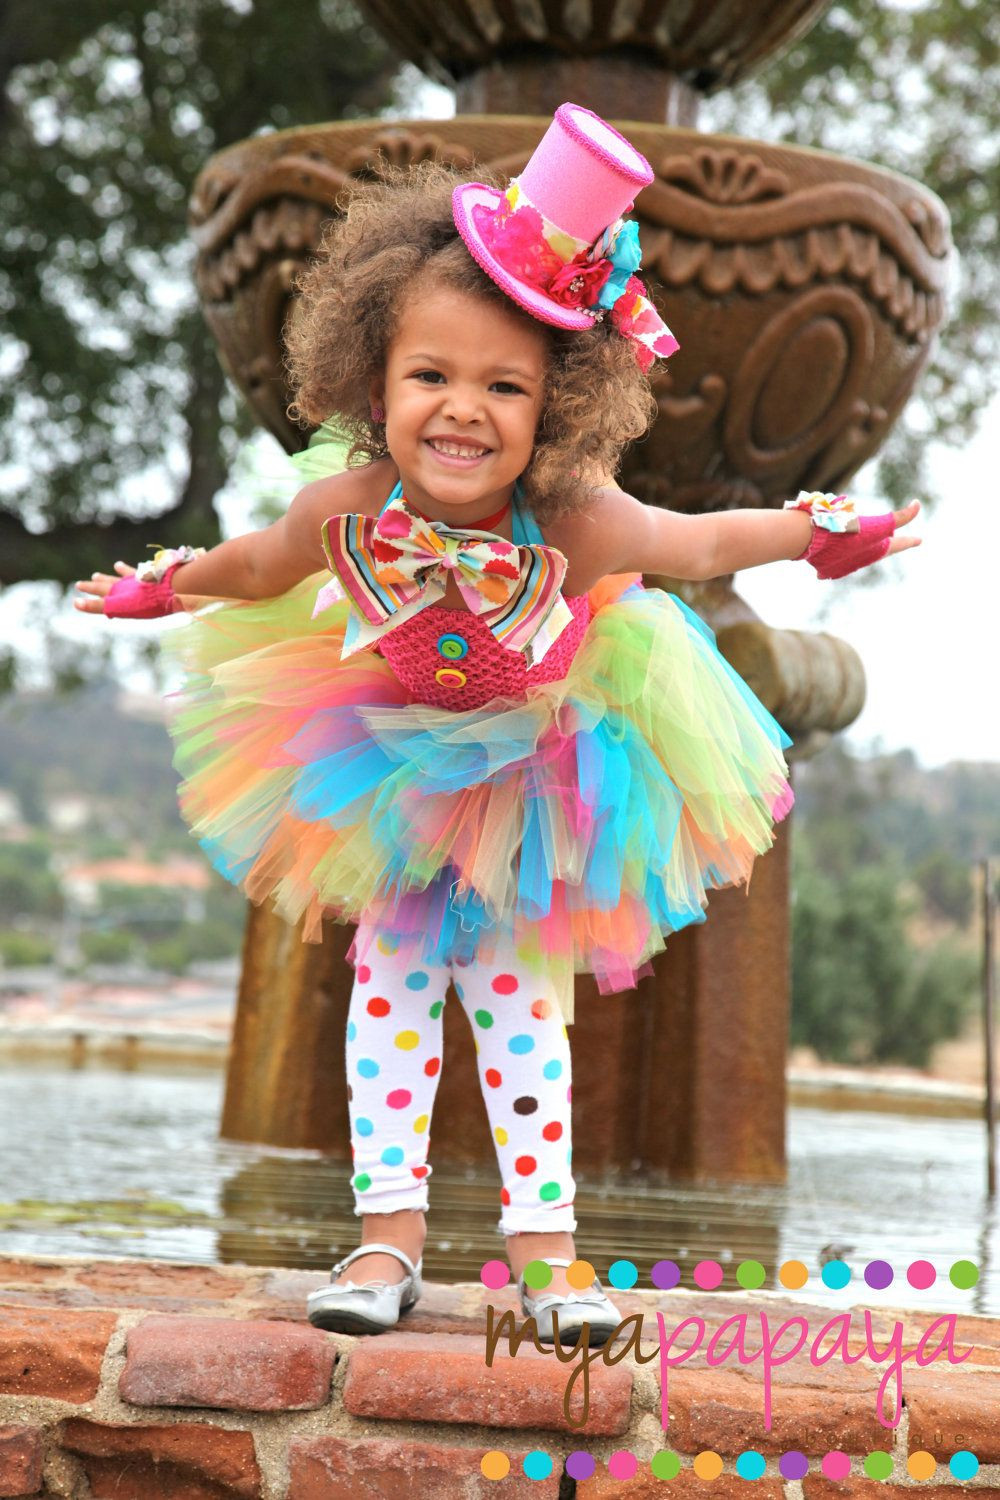 Mad Hatter Tea Party Costume Ideas
 Mad Hatter Costume Tutu Dress 12months 5t Alice in